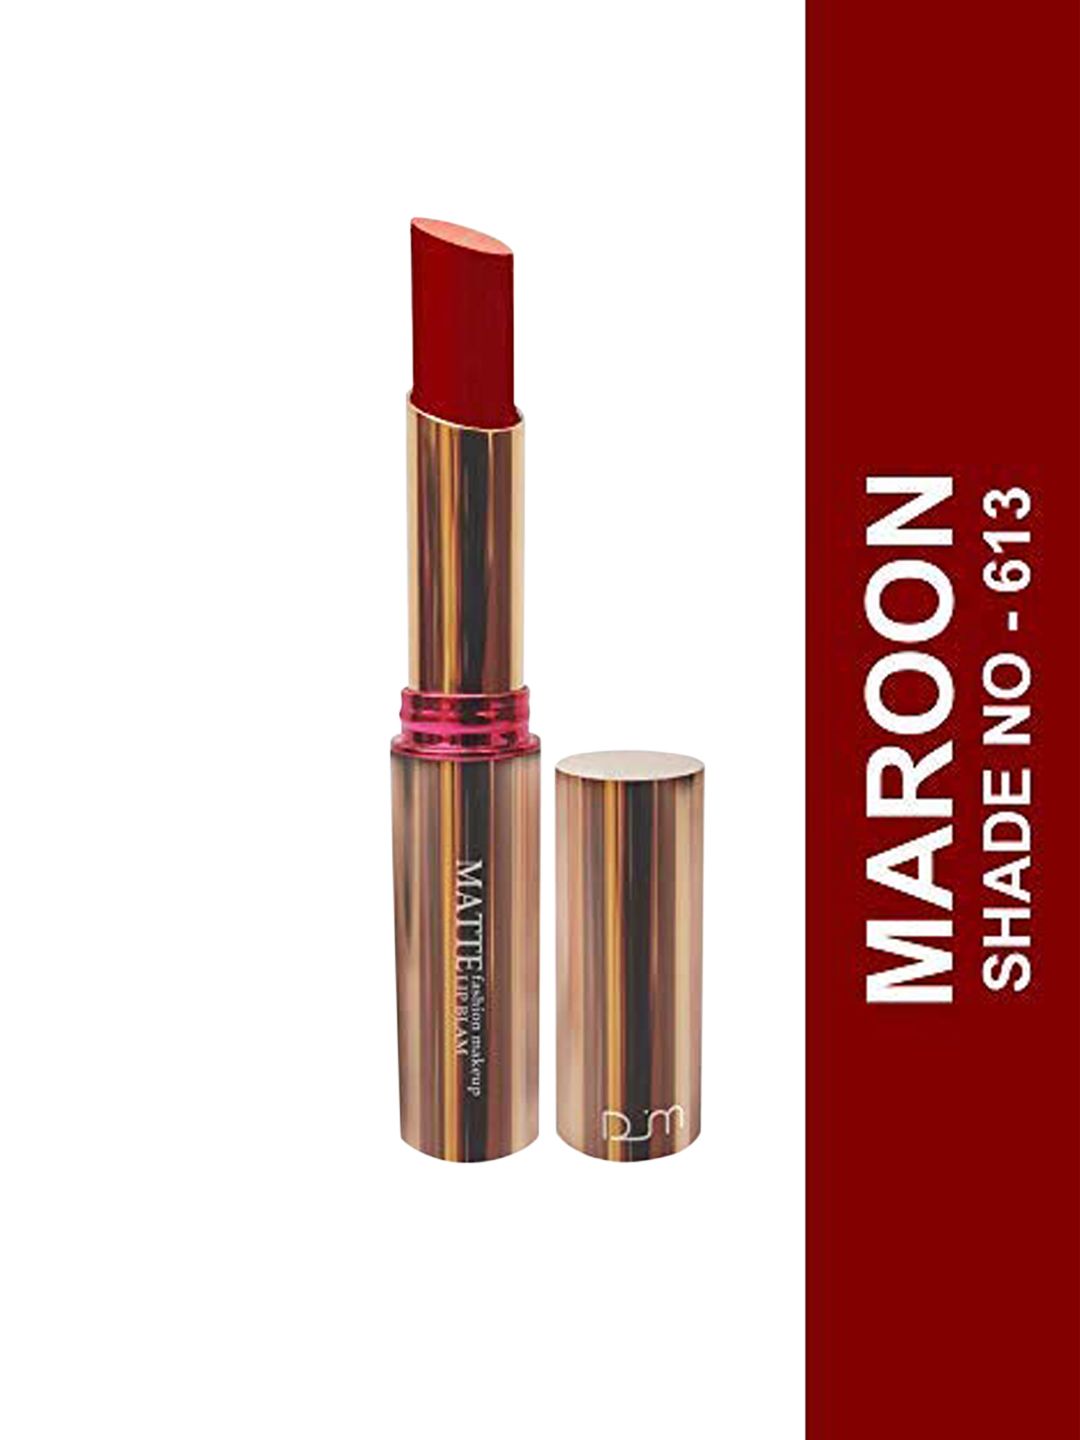 Seven Seas Matte With You Paraben Free Bullet Lipstick : Maroon 613 Price in India